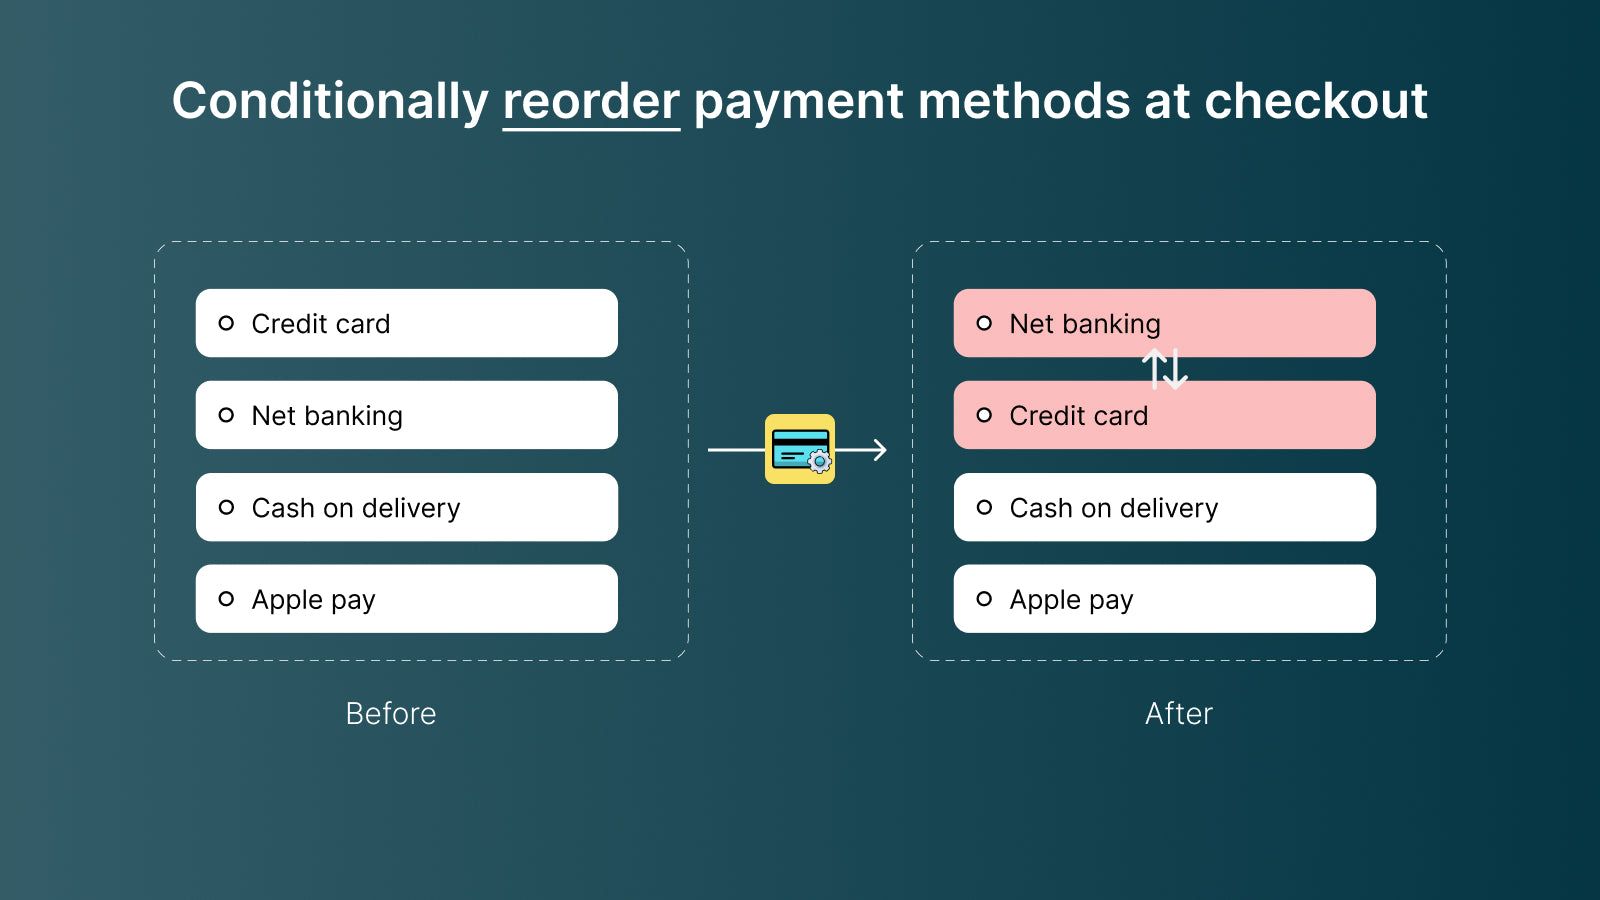 Conditionally reorder payment methods